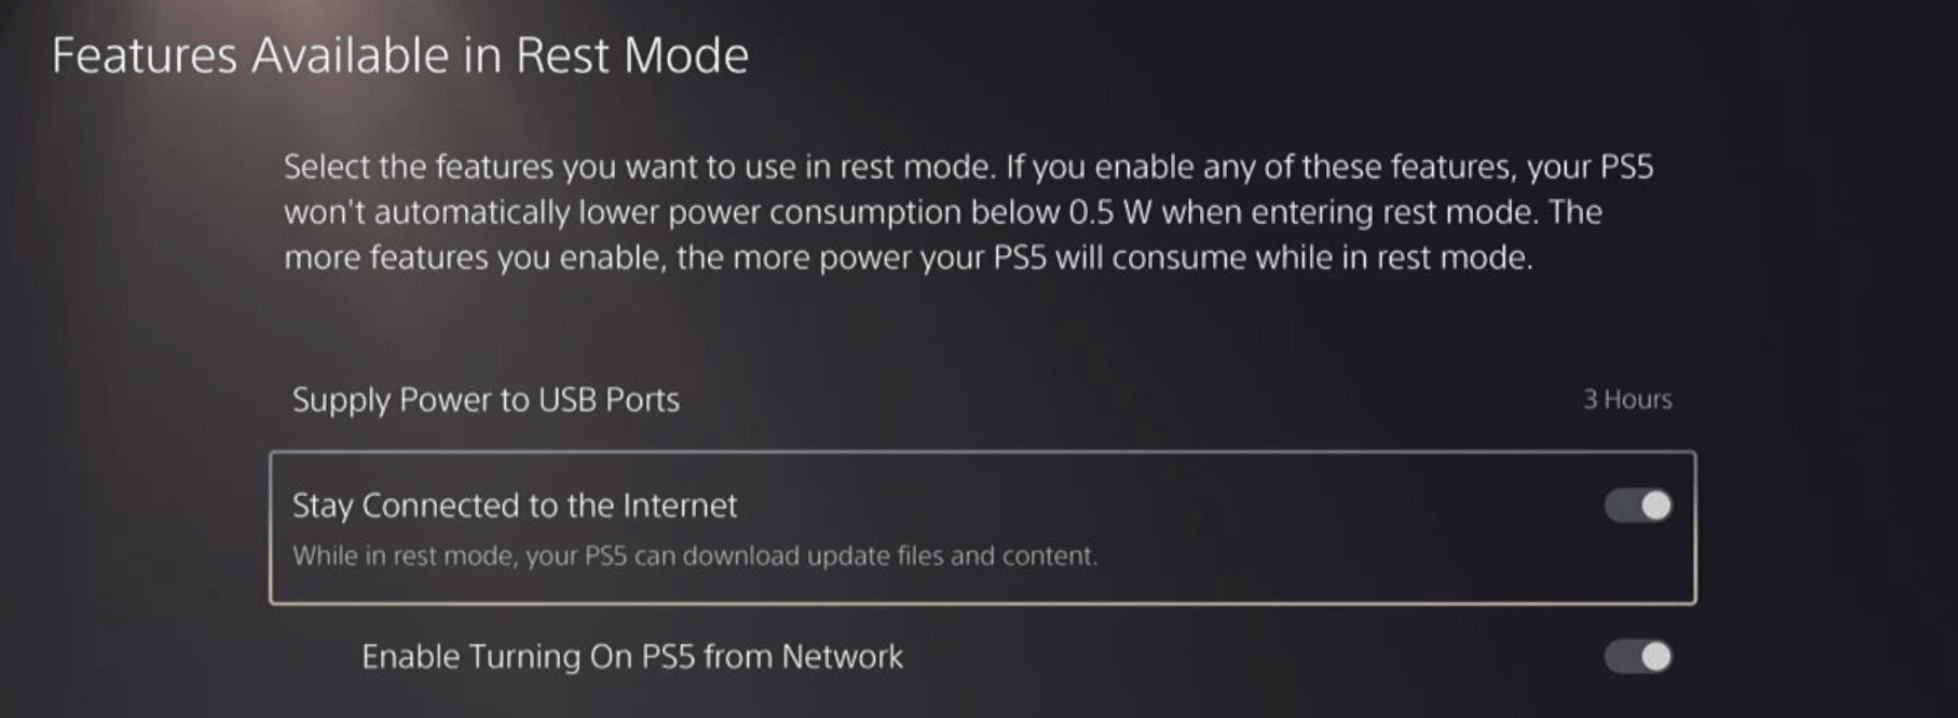 Stay Connected to the Internet is toggled in PS5 rest mode settings menu to enable automatic updates of Syzygy The Power of the Eclipse